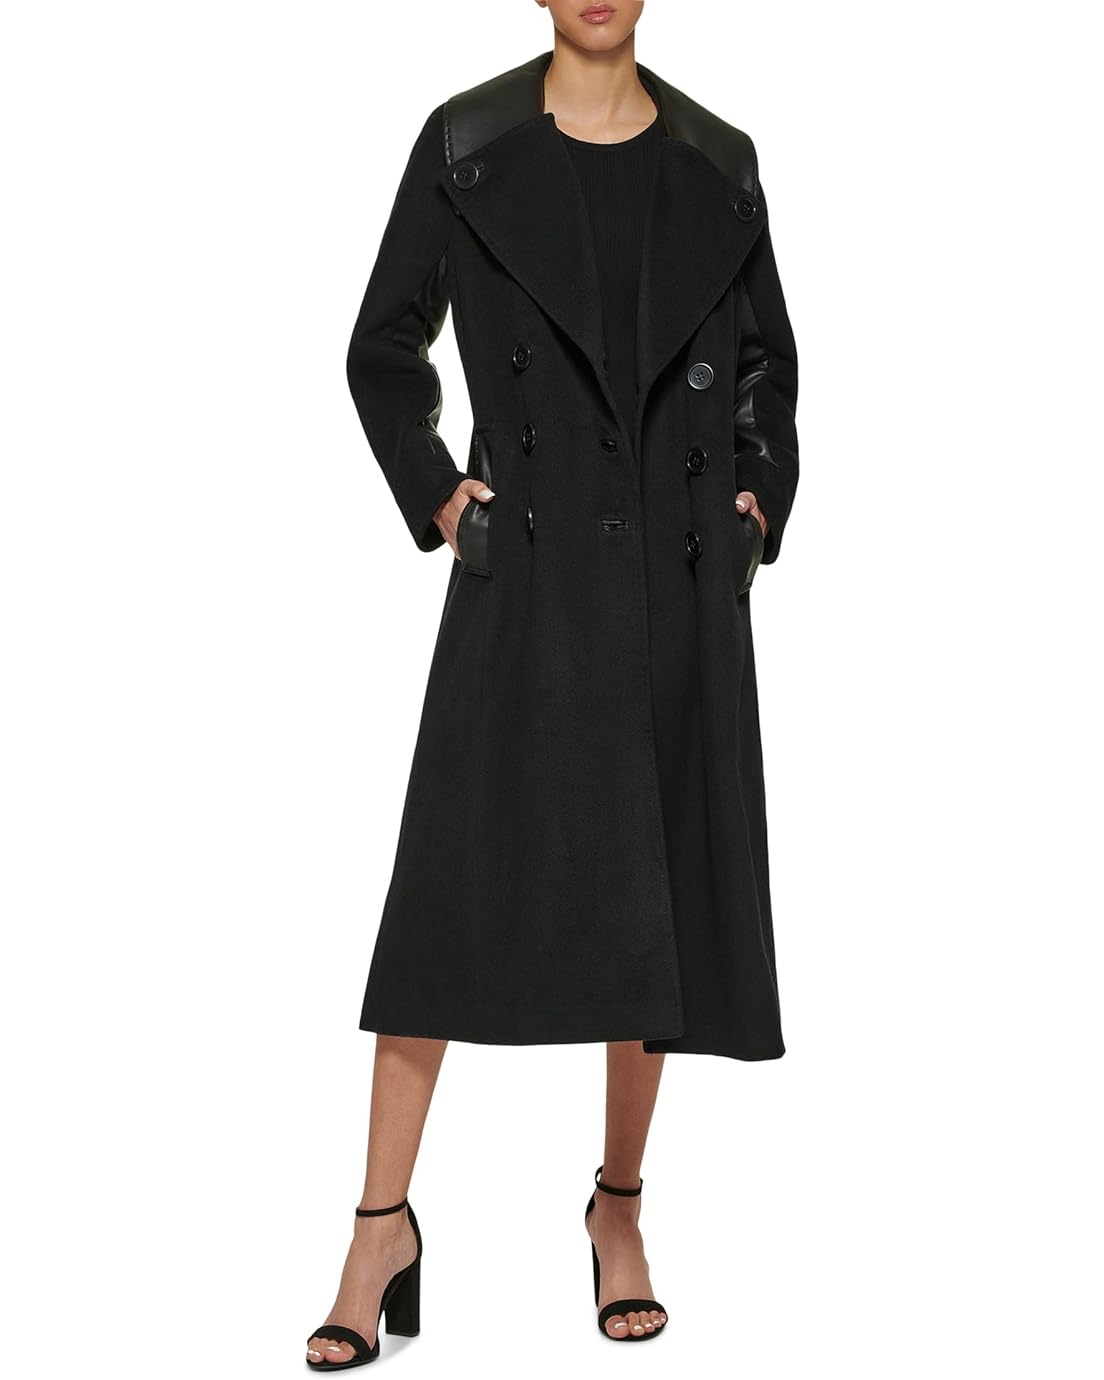 DKNY Double-Breasted Wool Coat